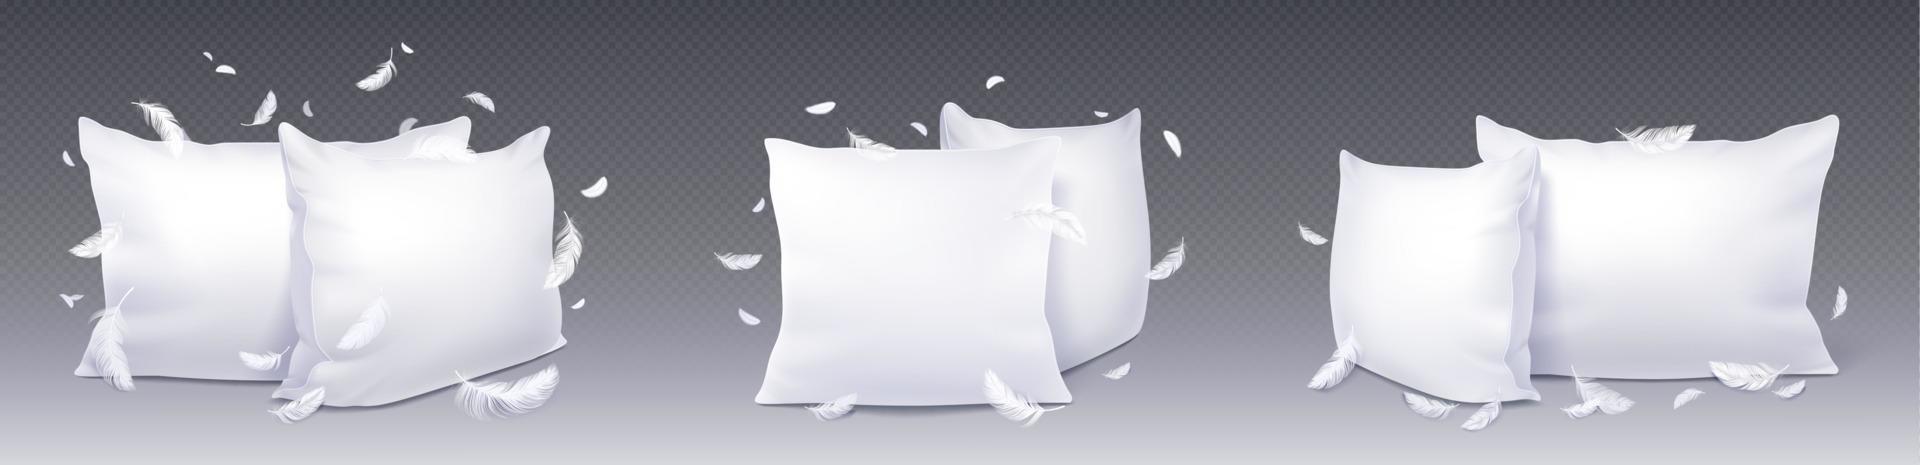 White square pillow realistic, top side view vector